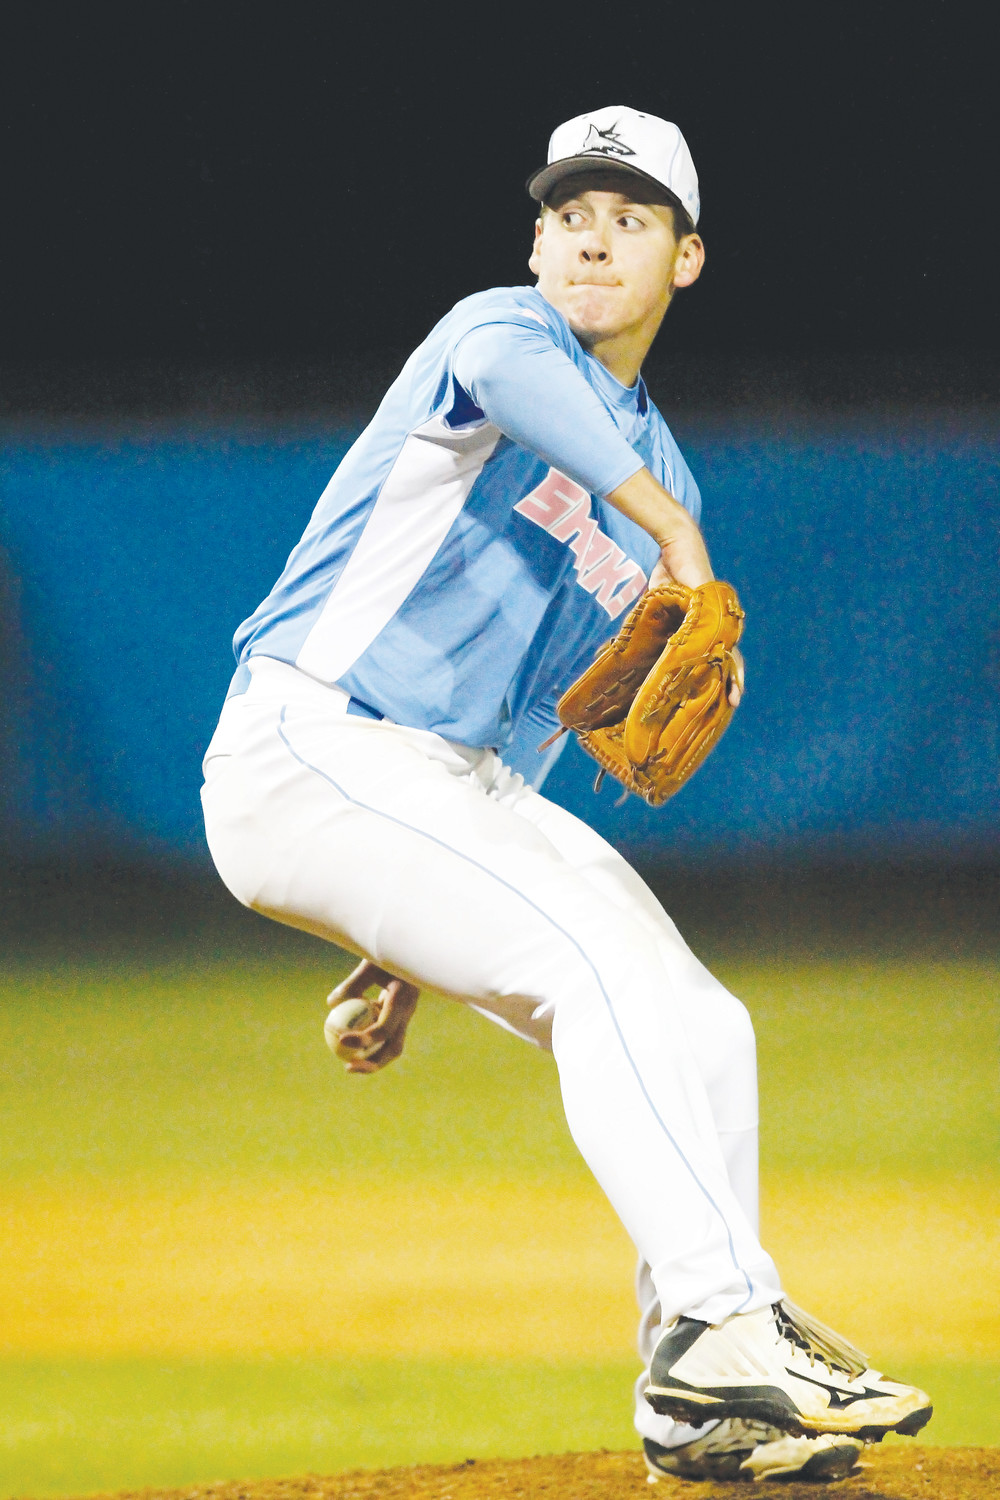 Shark pitcher Tony Roca delivers a pitch against Episcopal.